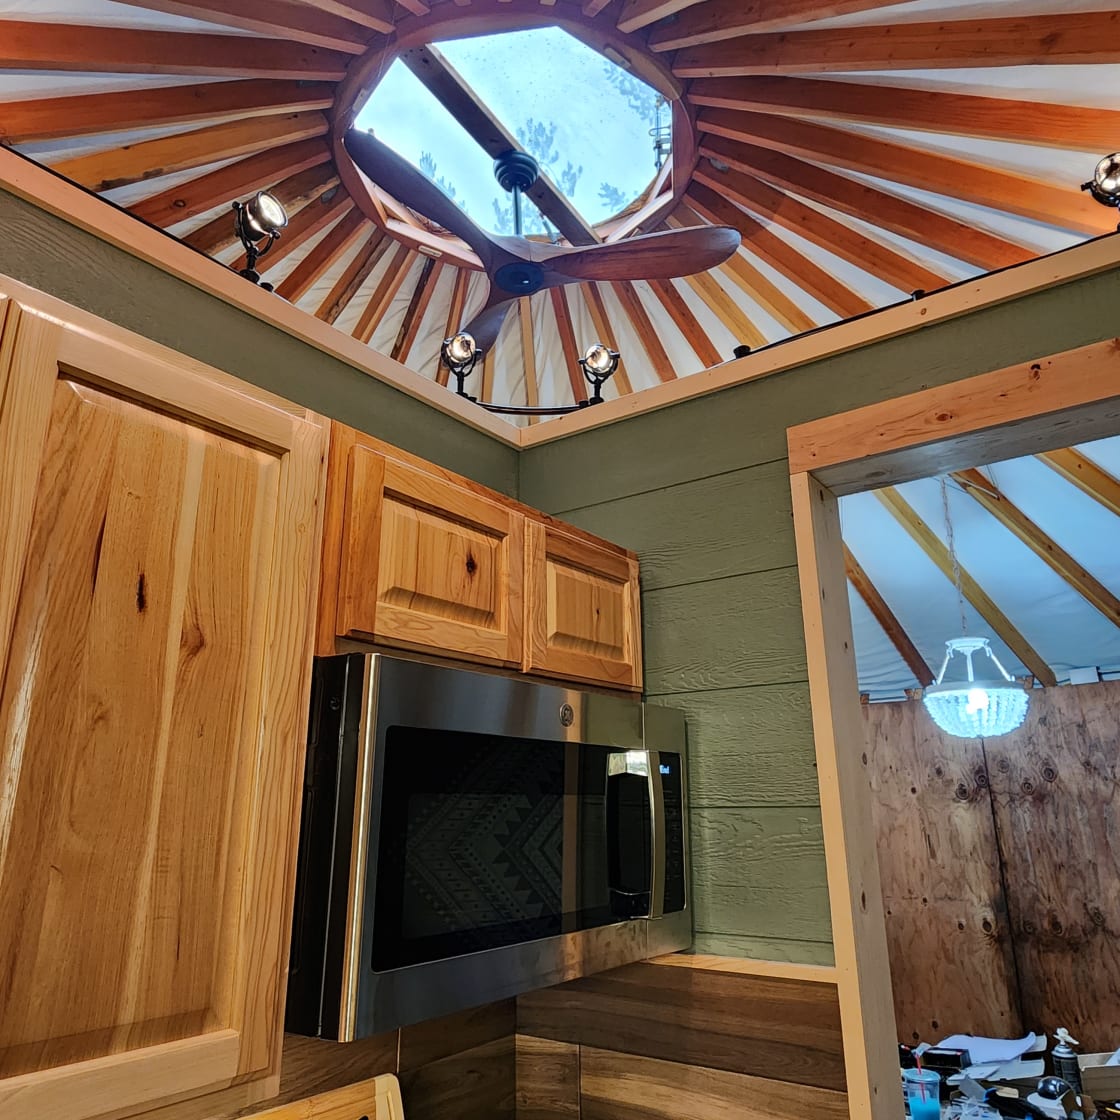 Remote controlled ceiling fan in yurt.